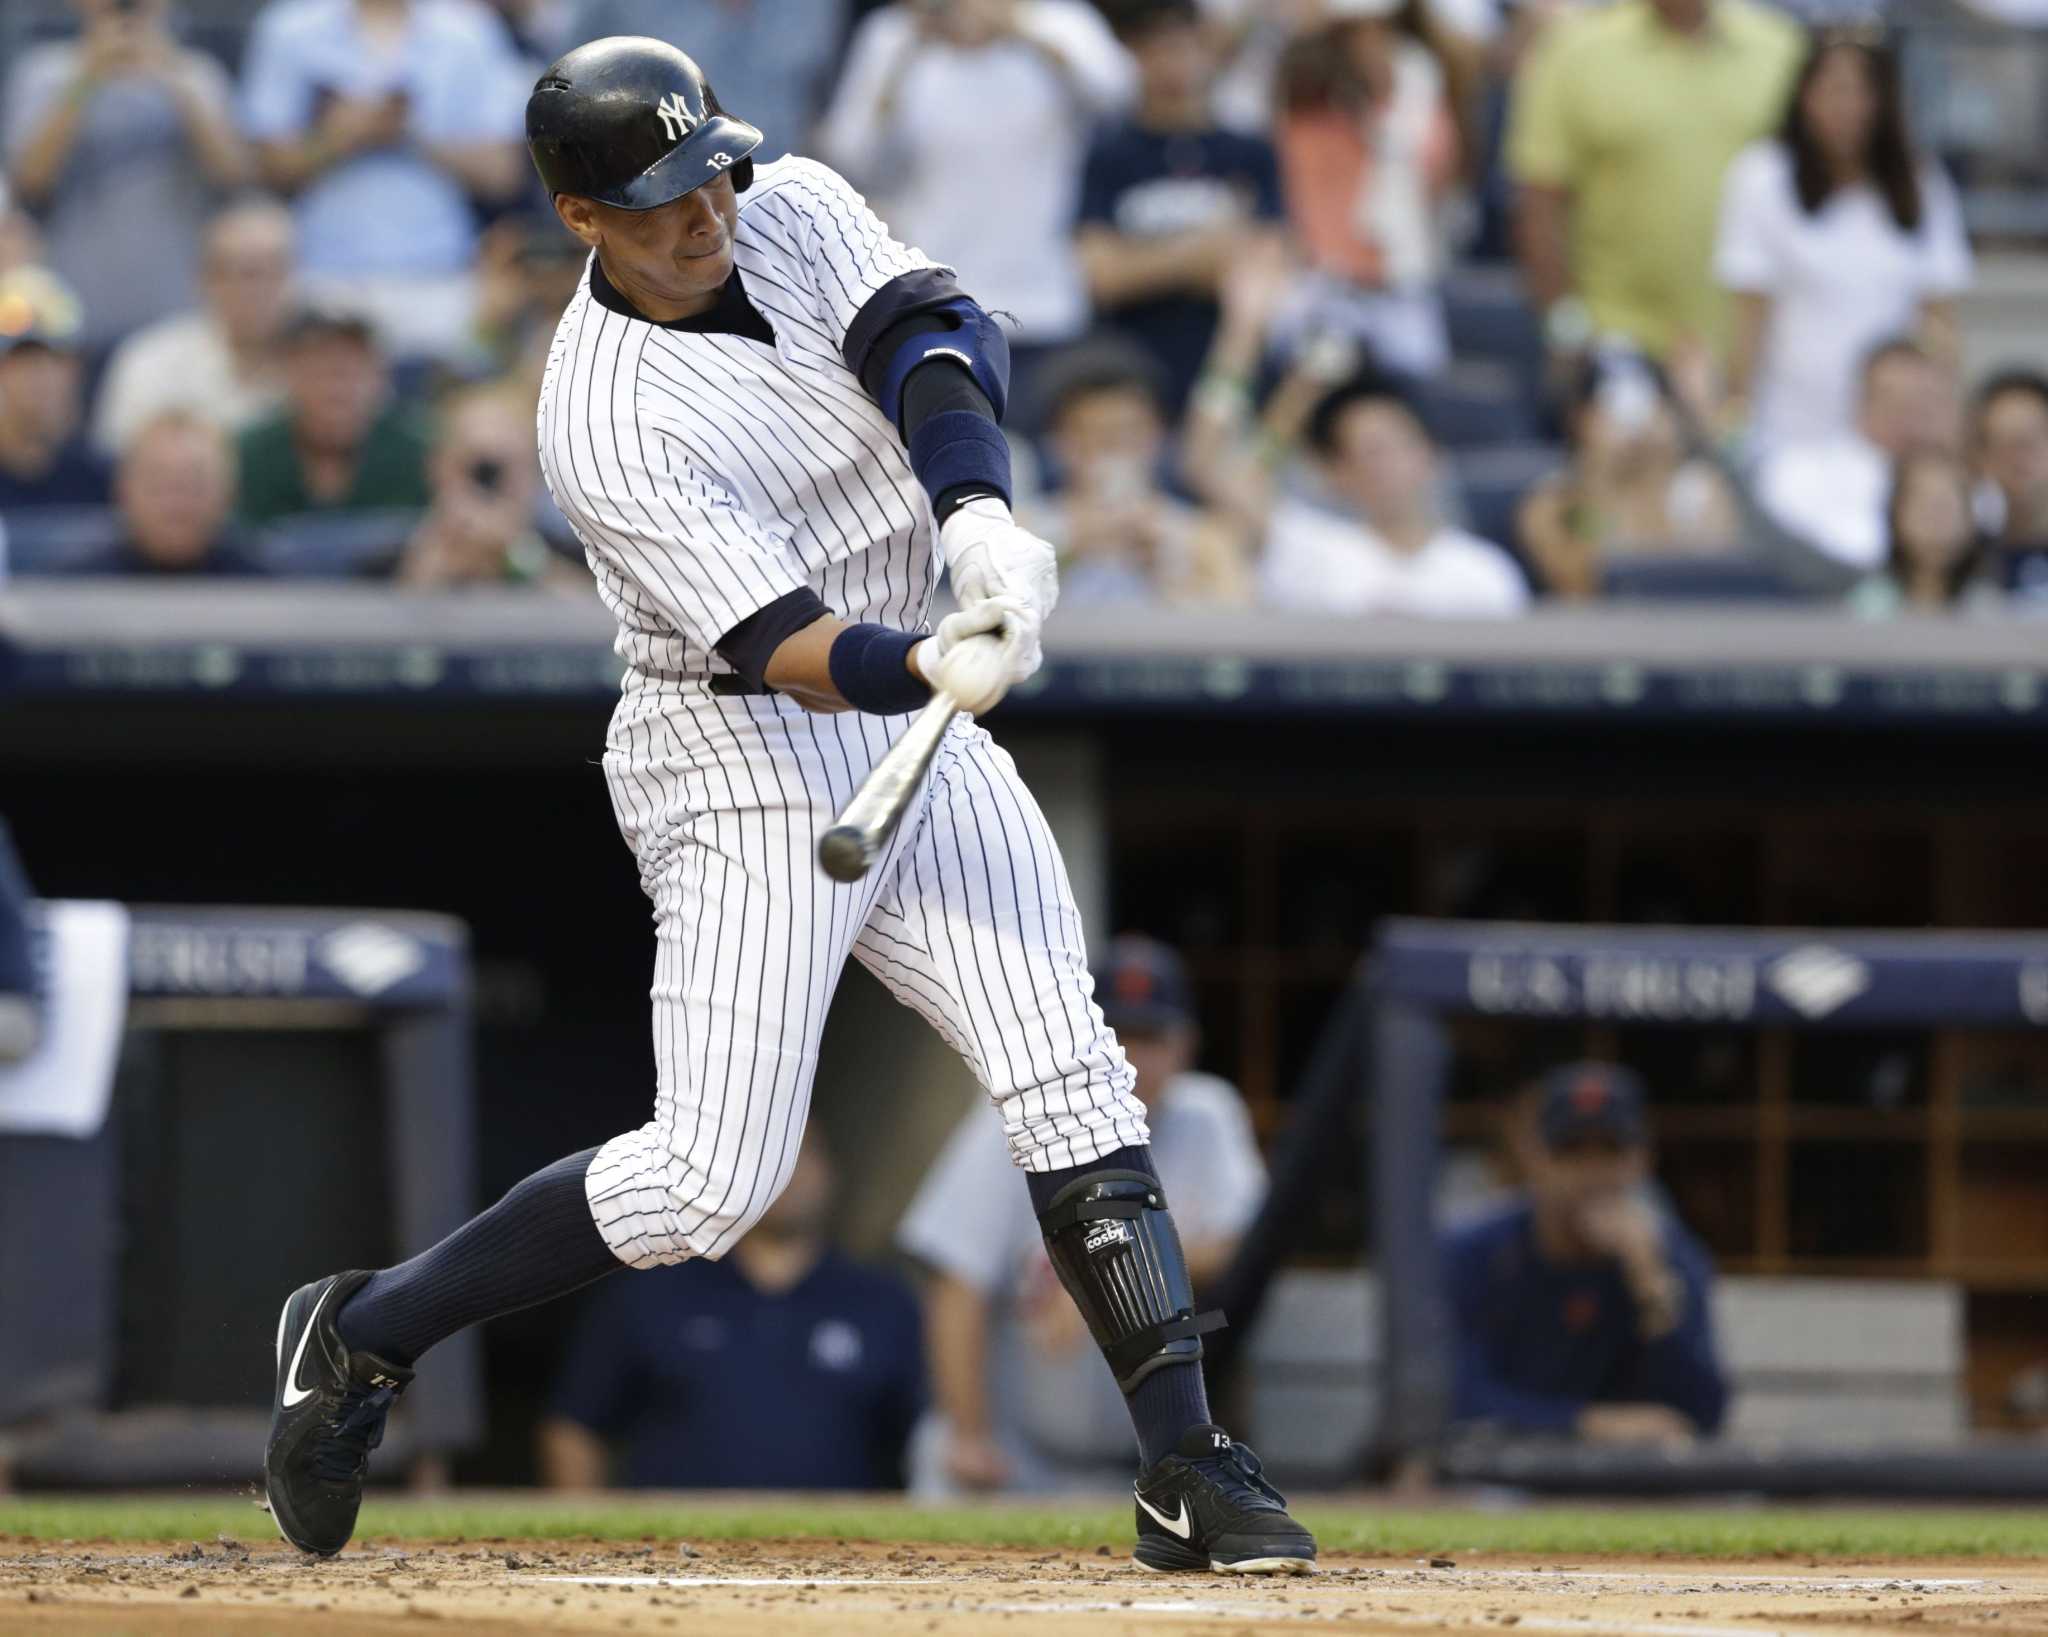 Jeter Reaches 3,000 Hits With Home Run - The New York Times